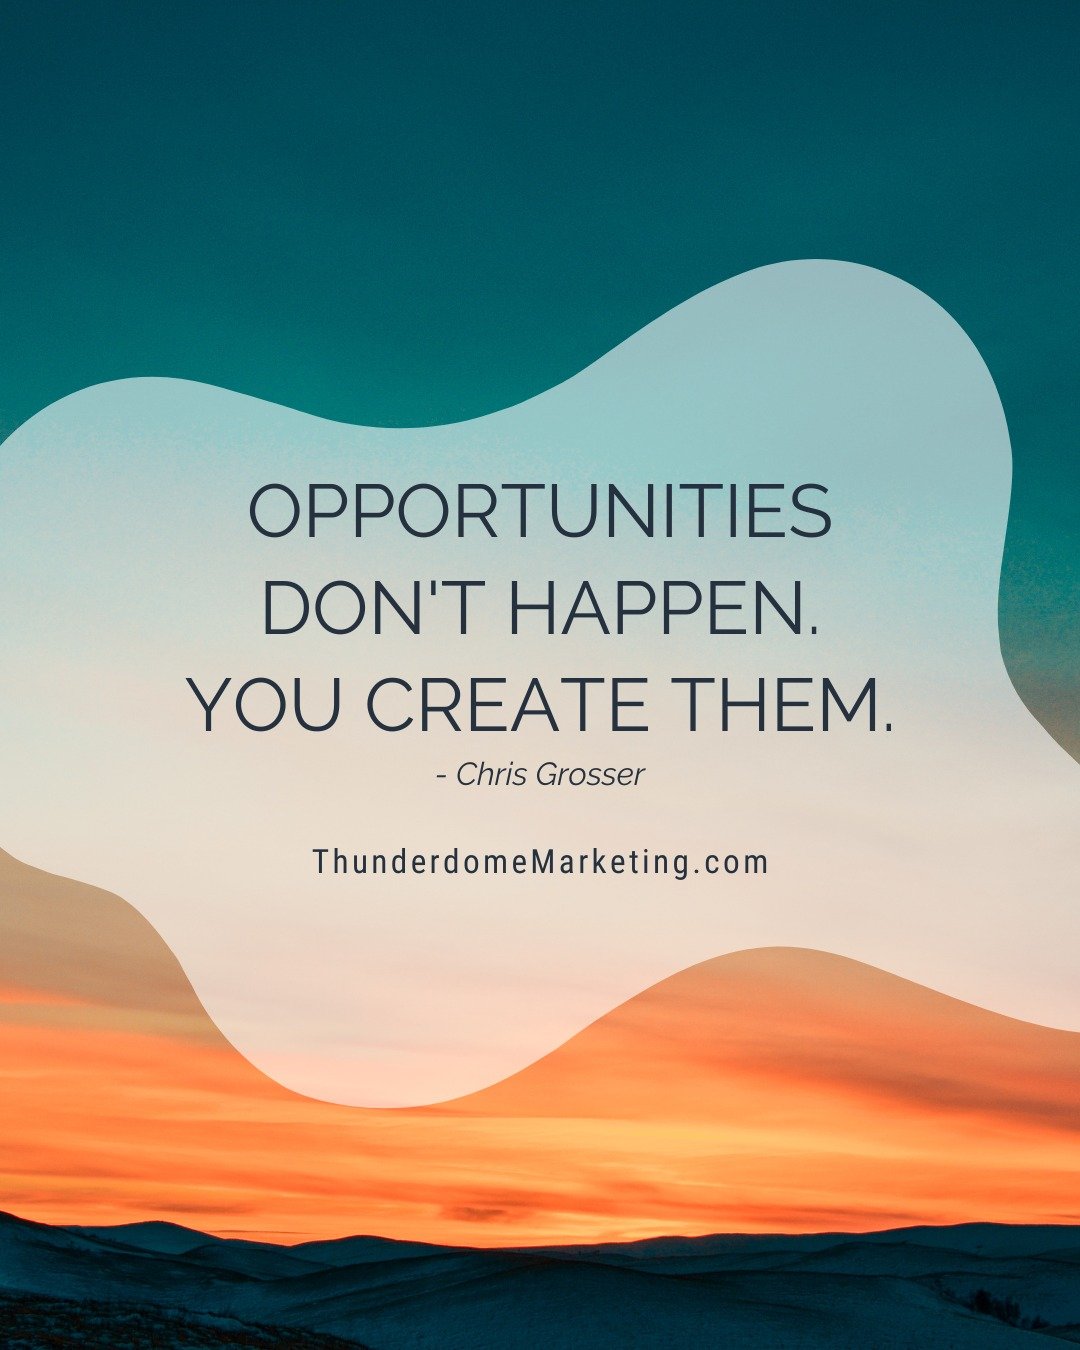 Why wait for opportunities to come when you can create them yourself? With Thunderdome Marketing, we craft bespoke digital campaigns that capture the essence of your brand and push you to the forefront of your industry. 🌟 Let's seize the day and cre